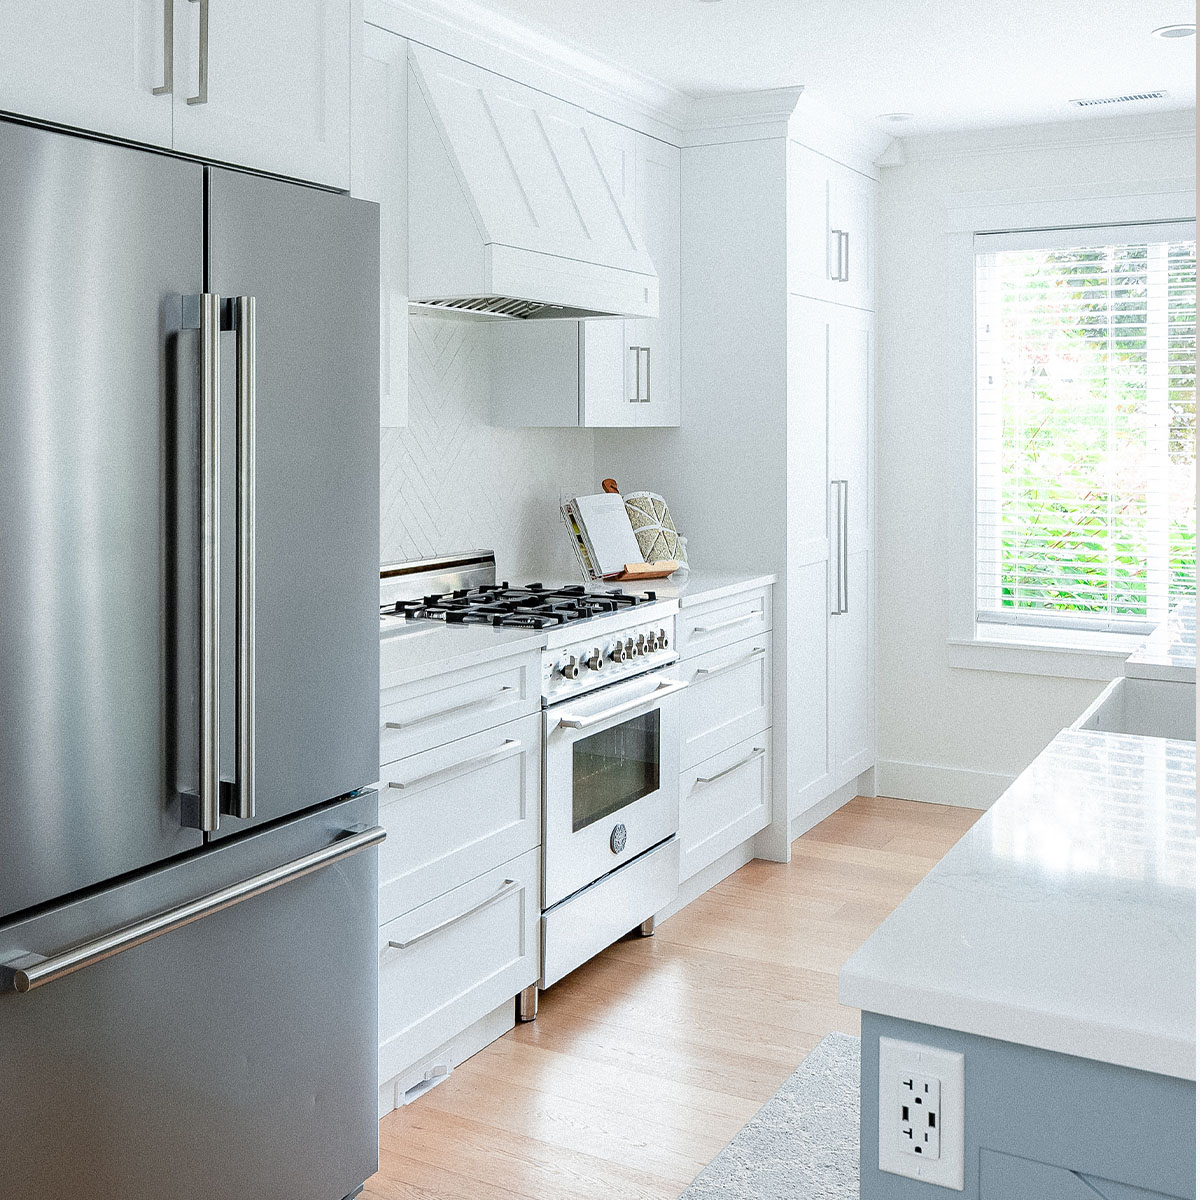 A modern kitchen with stainless steel refrigerator and stove.